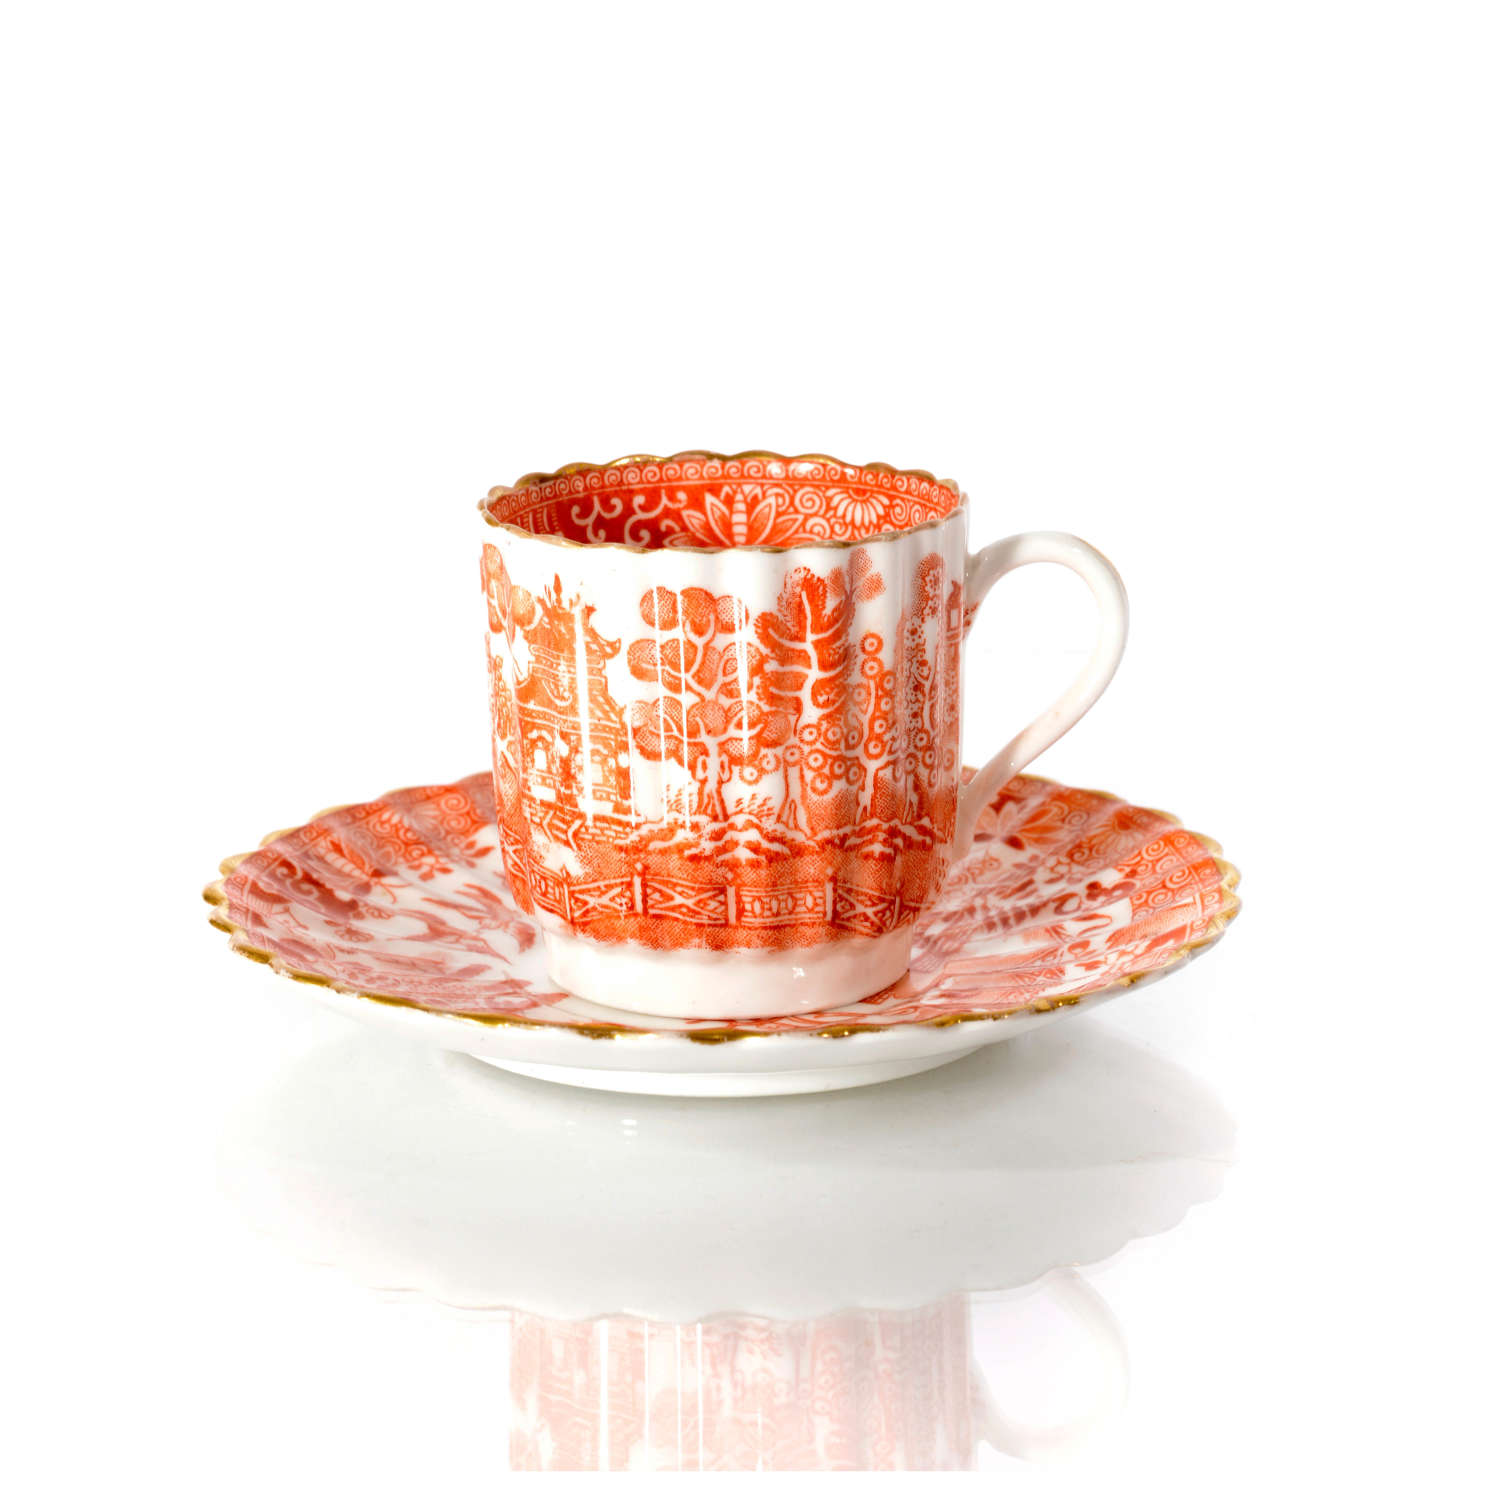 Spode Copeland Orange Willow Pattern Coffee Cup and Saucer